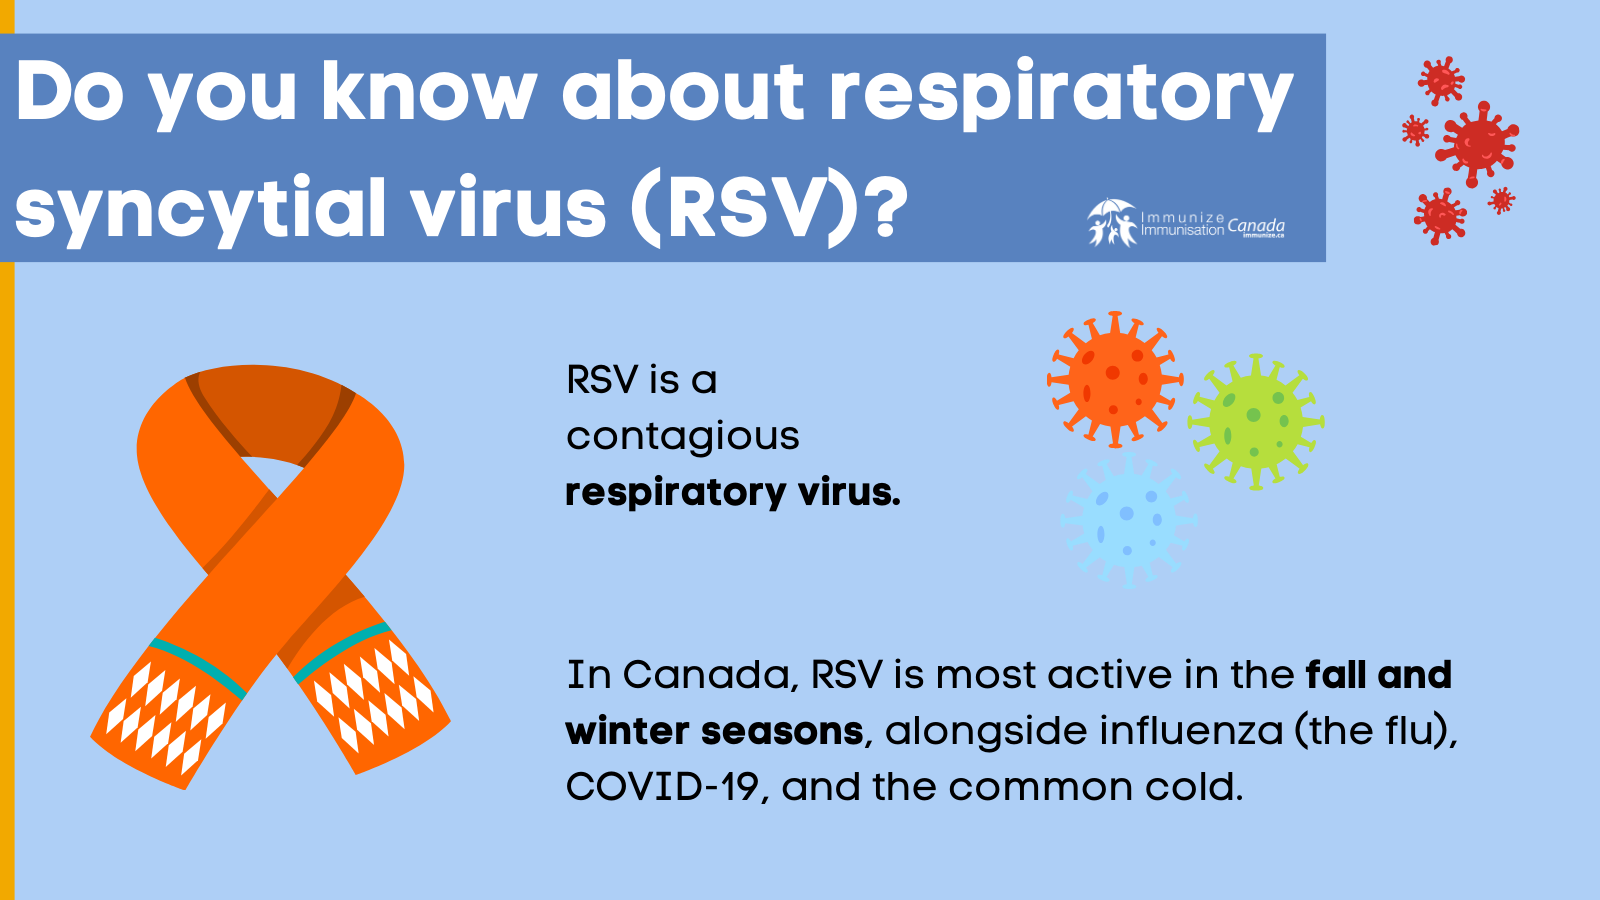 ​Do you know about respiratory syncytial virus (RSV)? - image 5 for Twitter